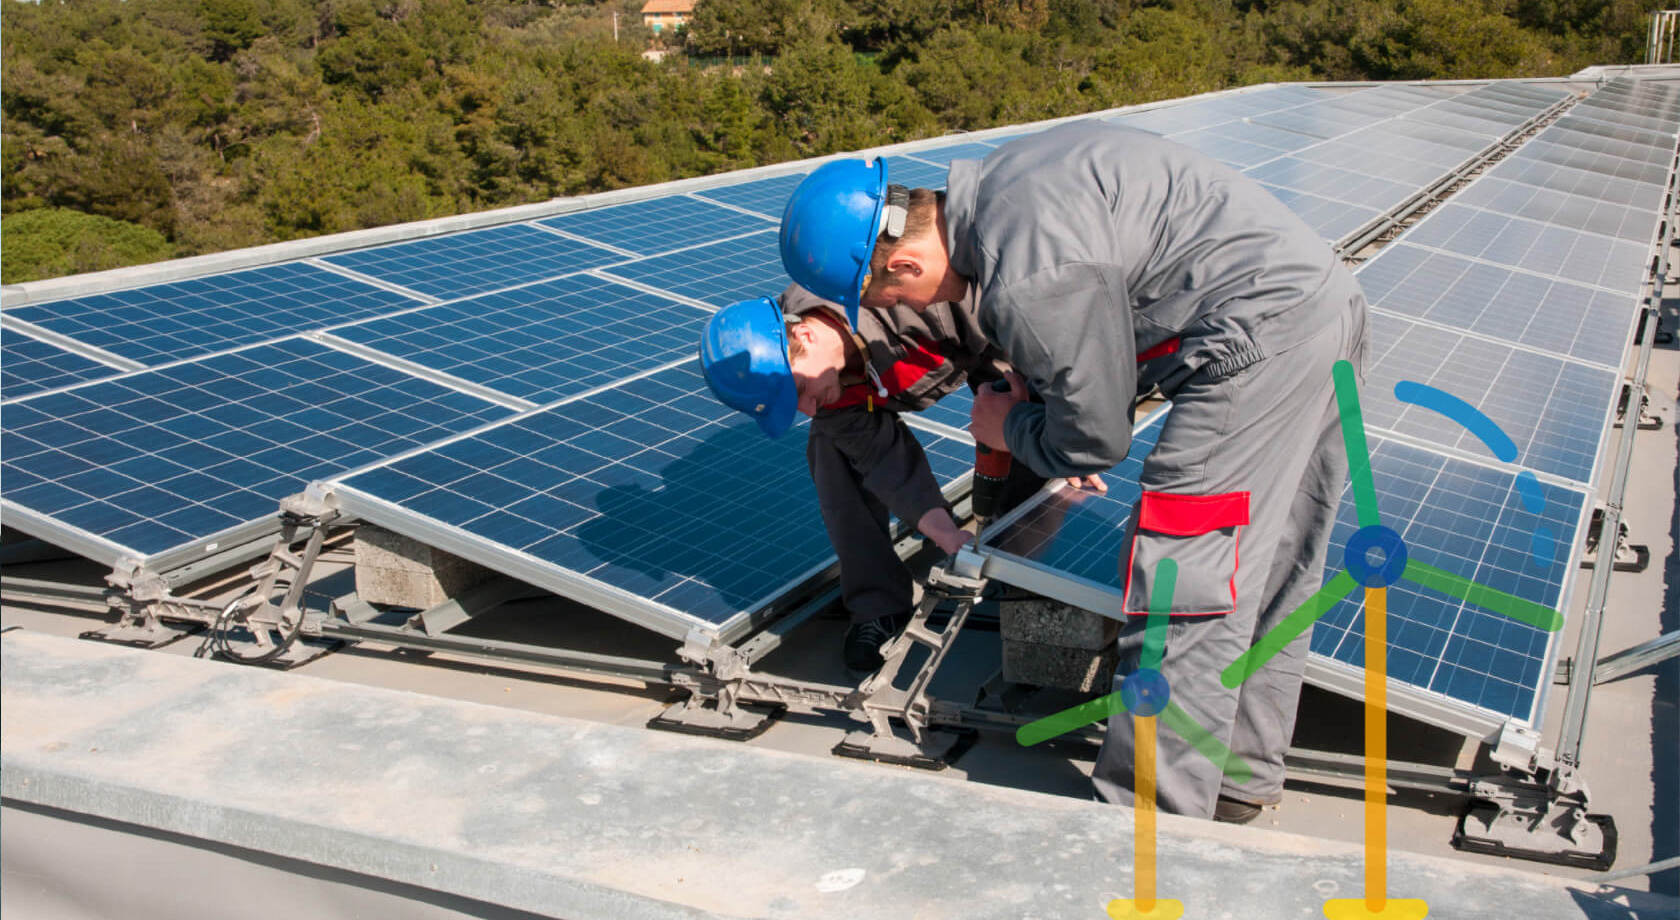 Two men wearing helmets and overalls outside working on solar panels